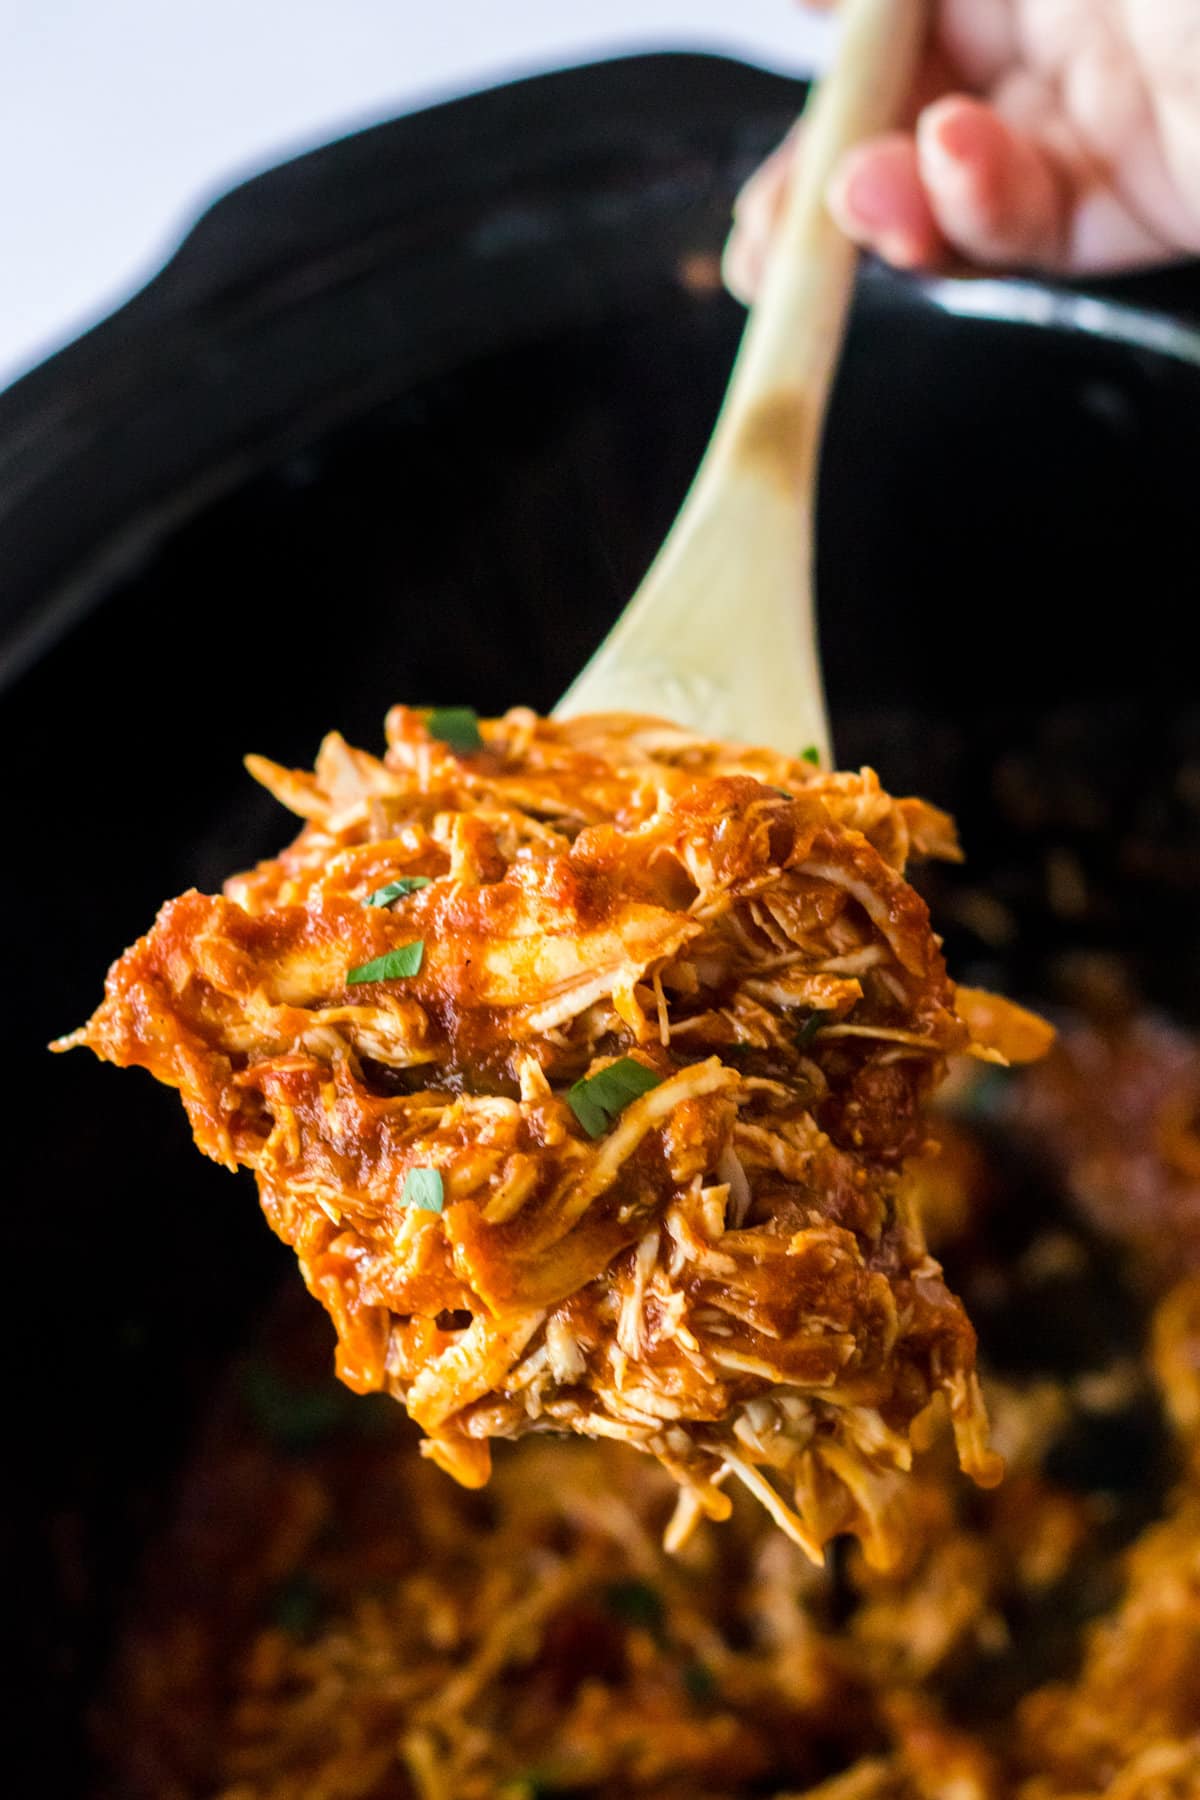 Wooden spoon scooping shredded salsa chicken from slow cooker.